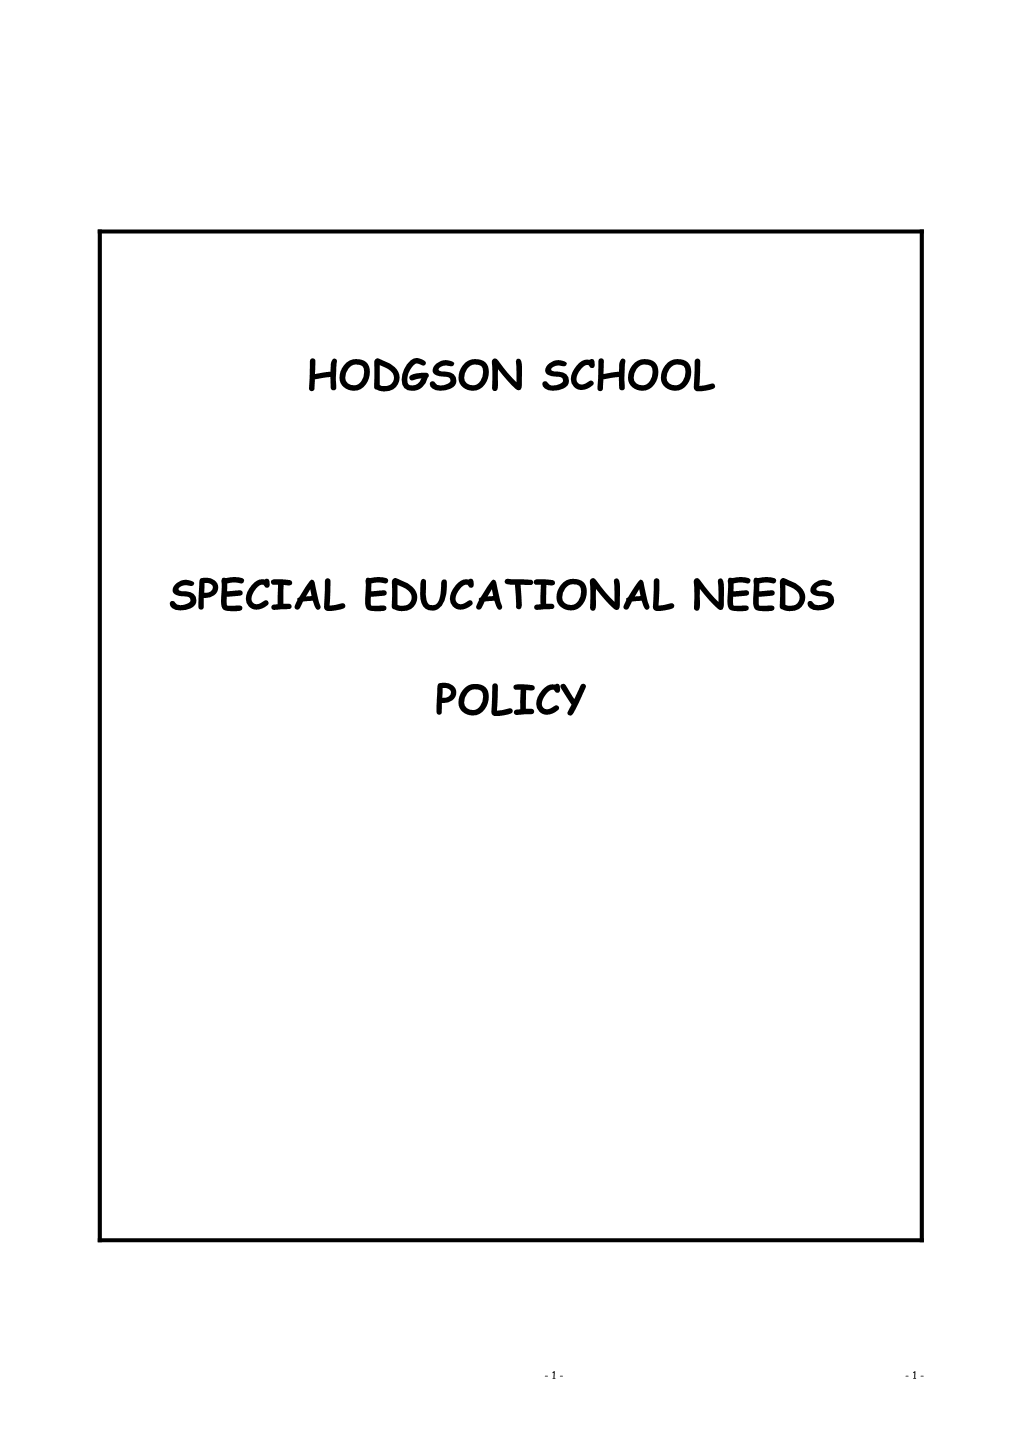 A Whole - School Policy on Special Educational Needs